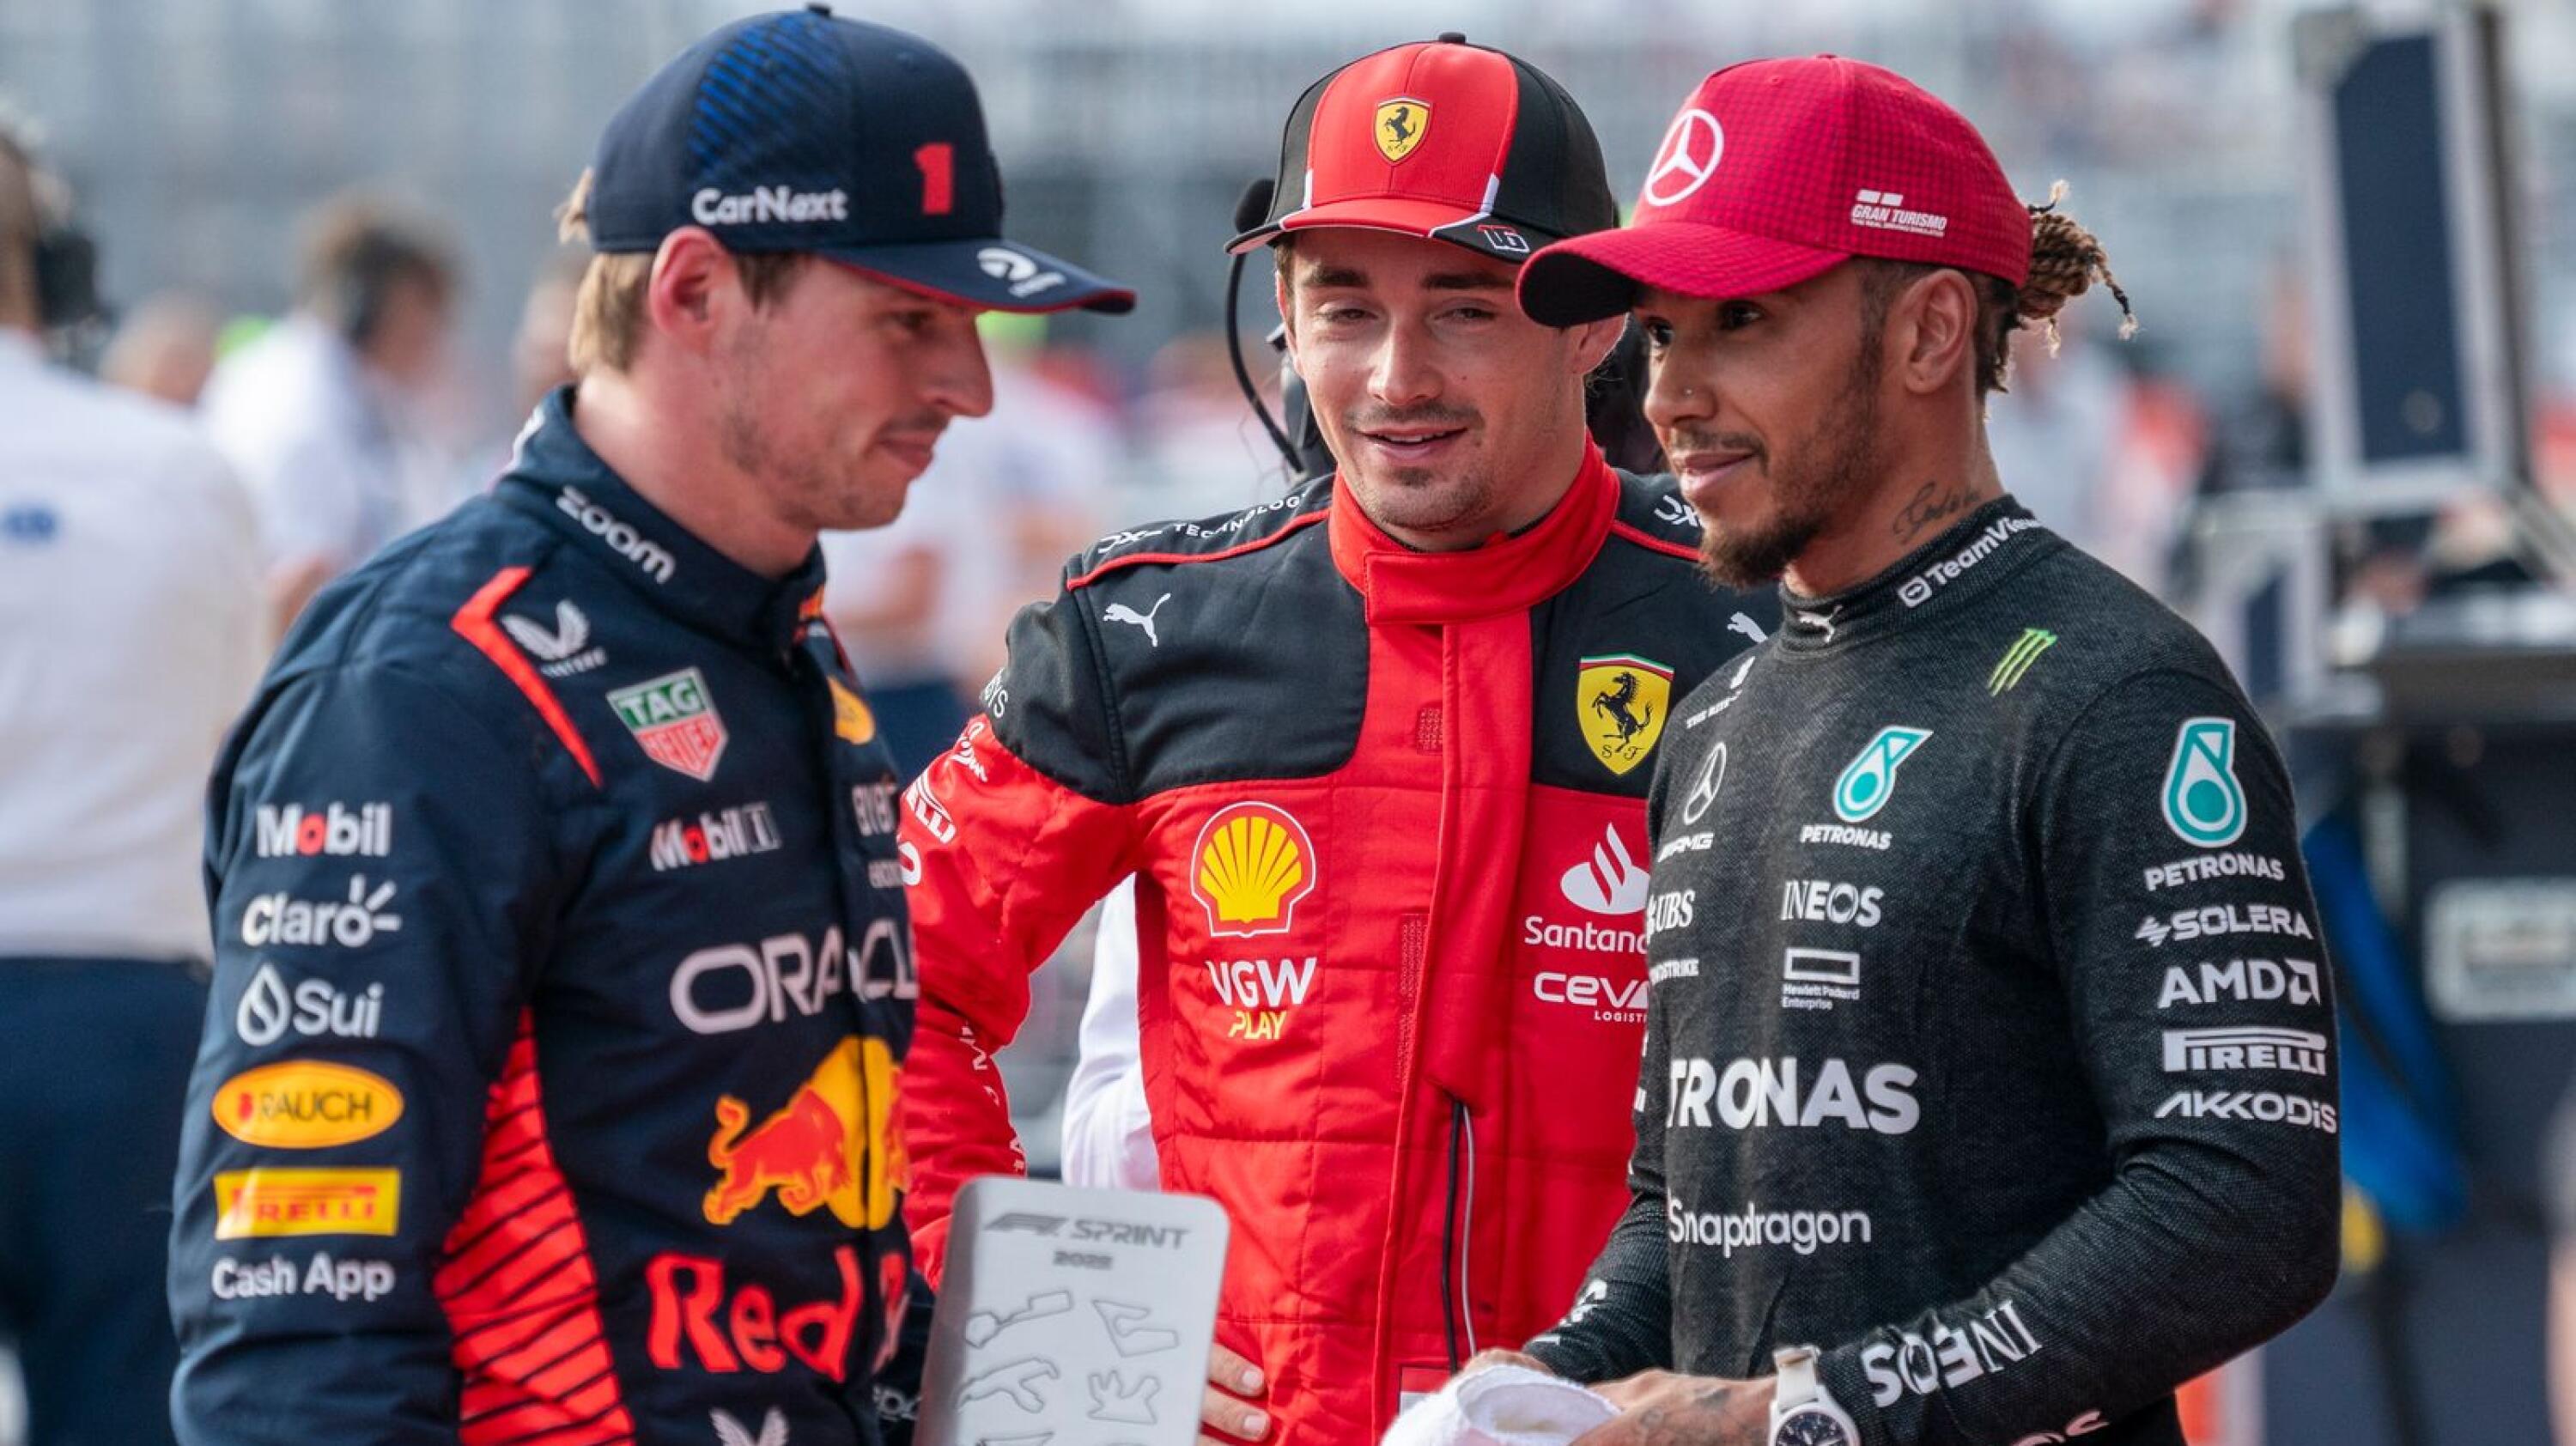 Red Bull’s Max Verstappen, Ferrari’s driver Charles Leclerc, and Mercedes’ Lewis Hamilton have a chat following the sprint race ahead of the United States Grand Prix.